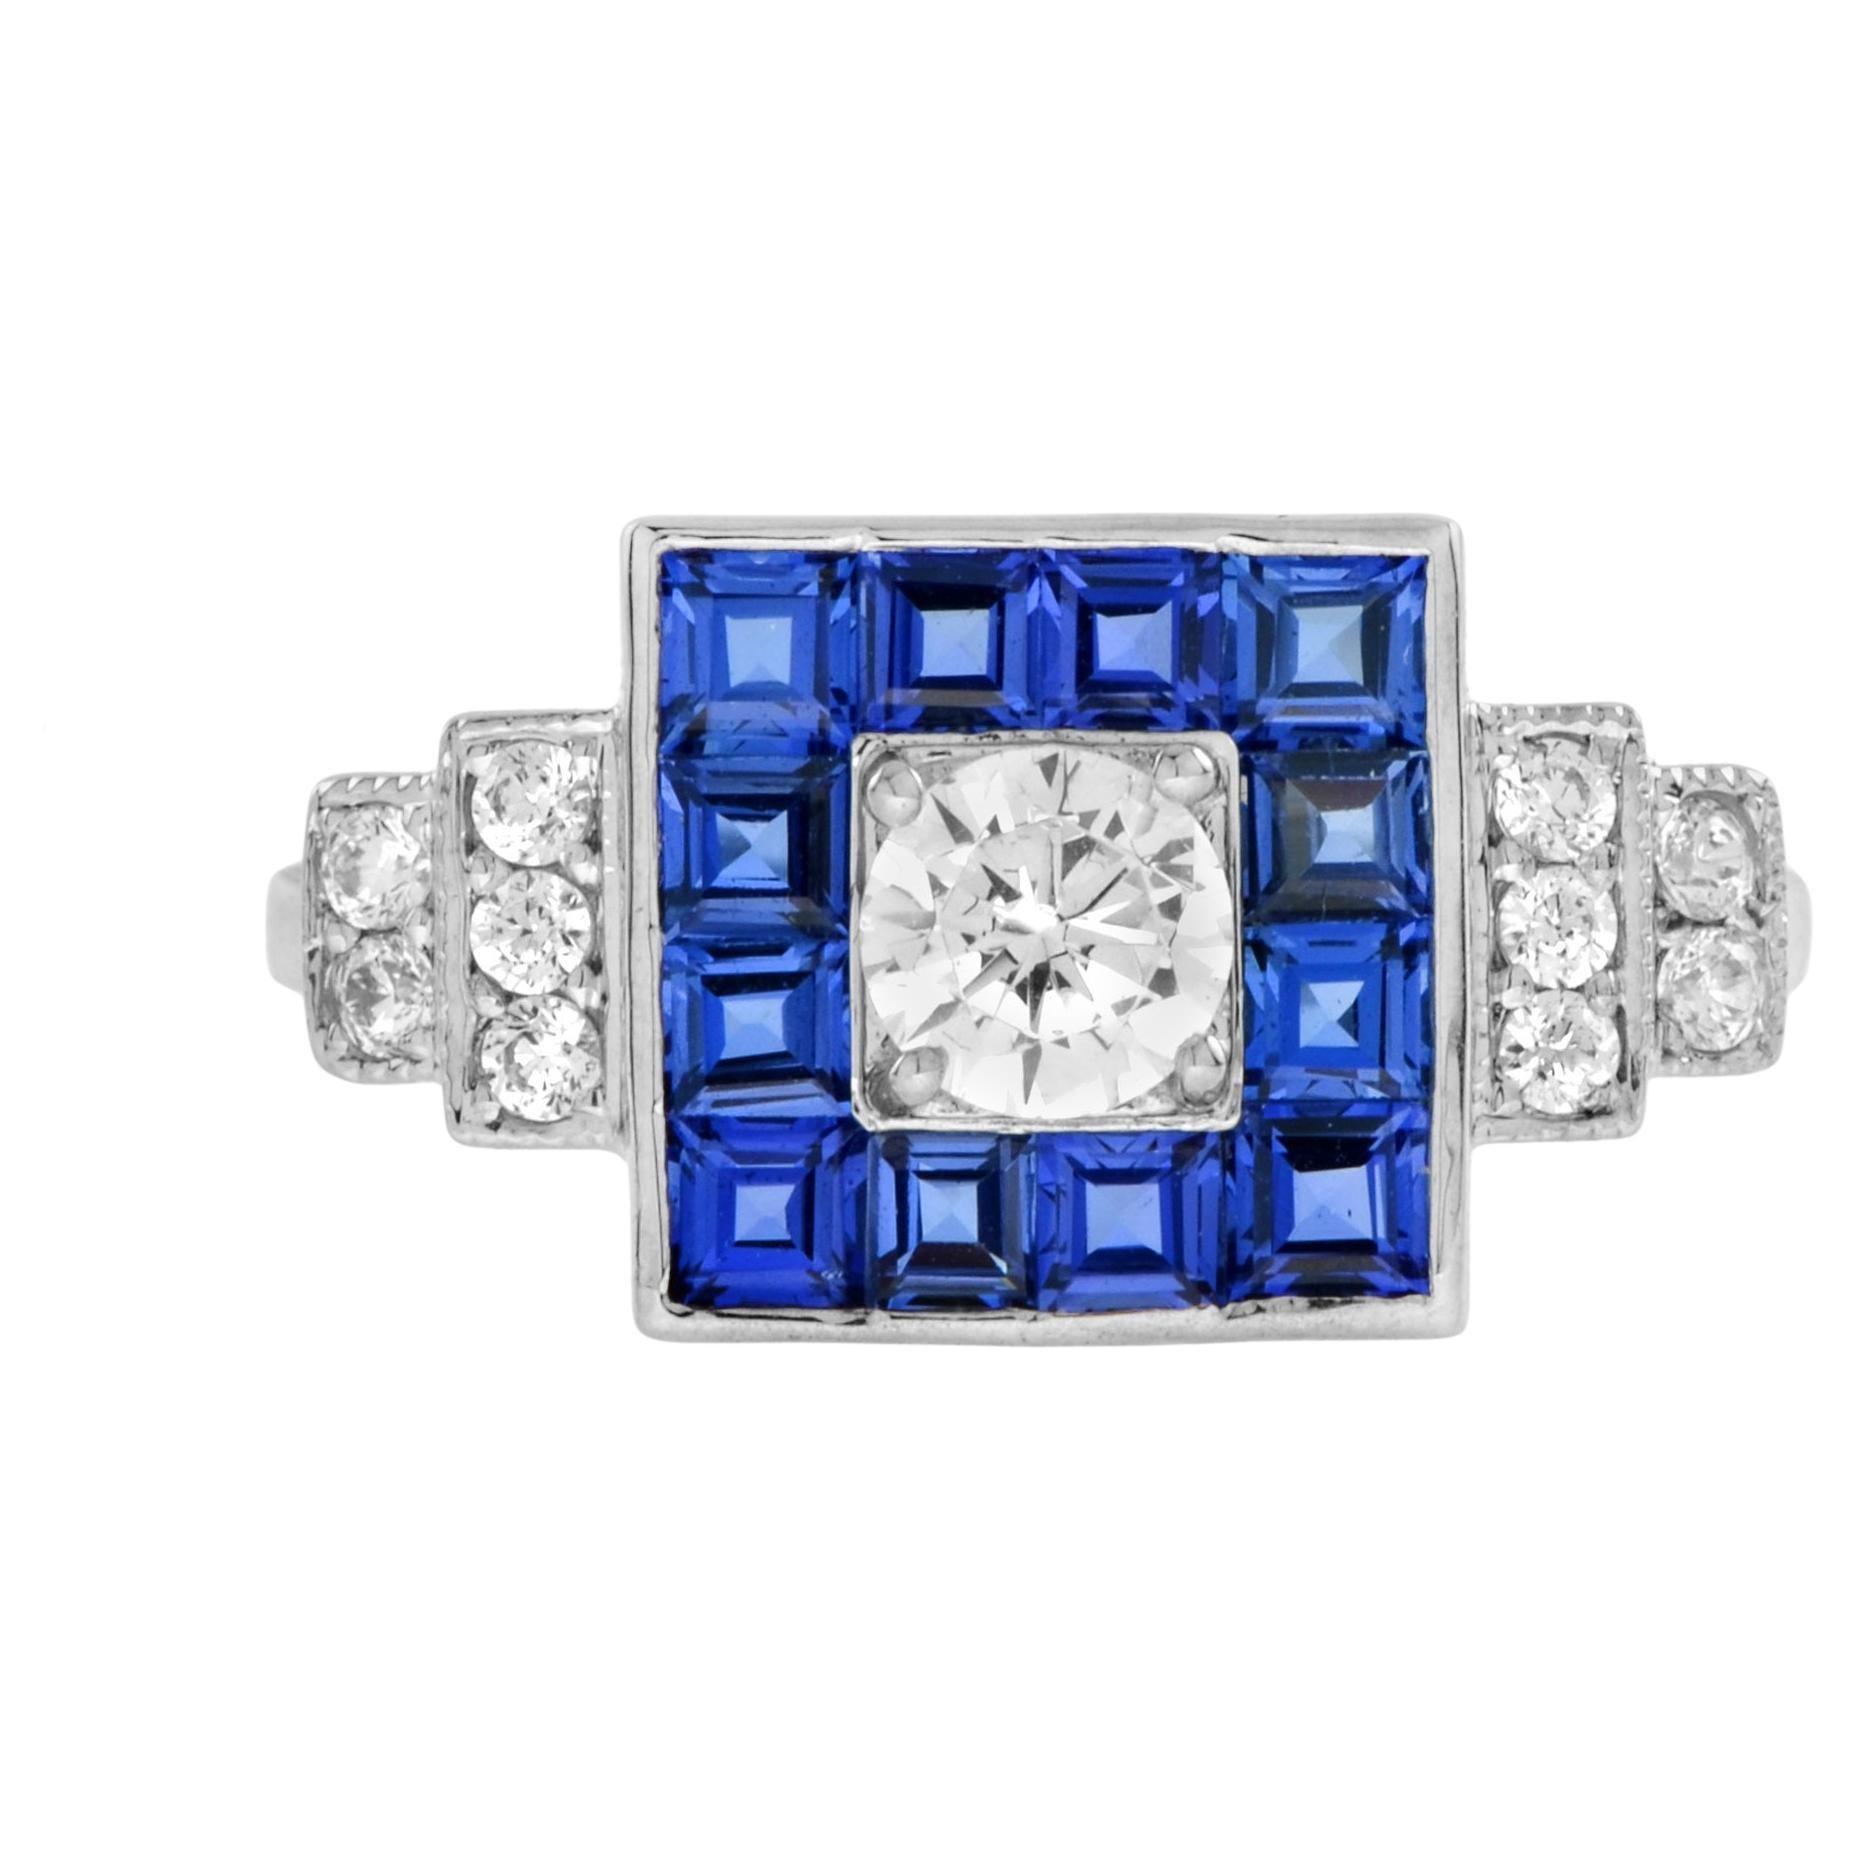 For Sale:  Diamond Blue Sapphire Art Deco Style Square Shape Engagement Ring in 18K Gold